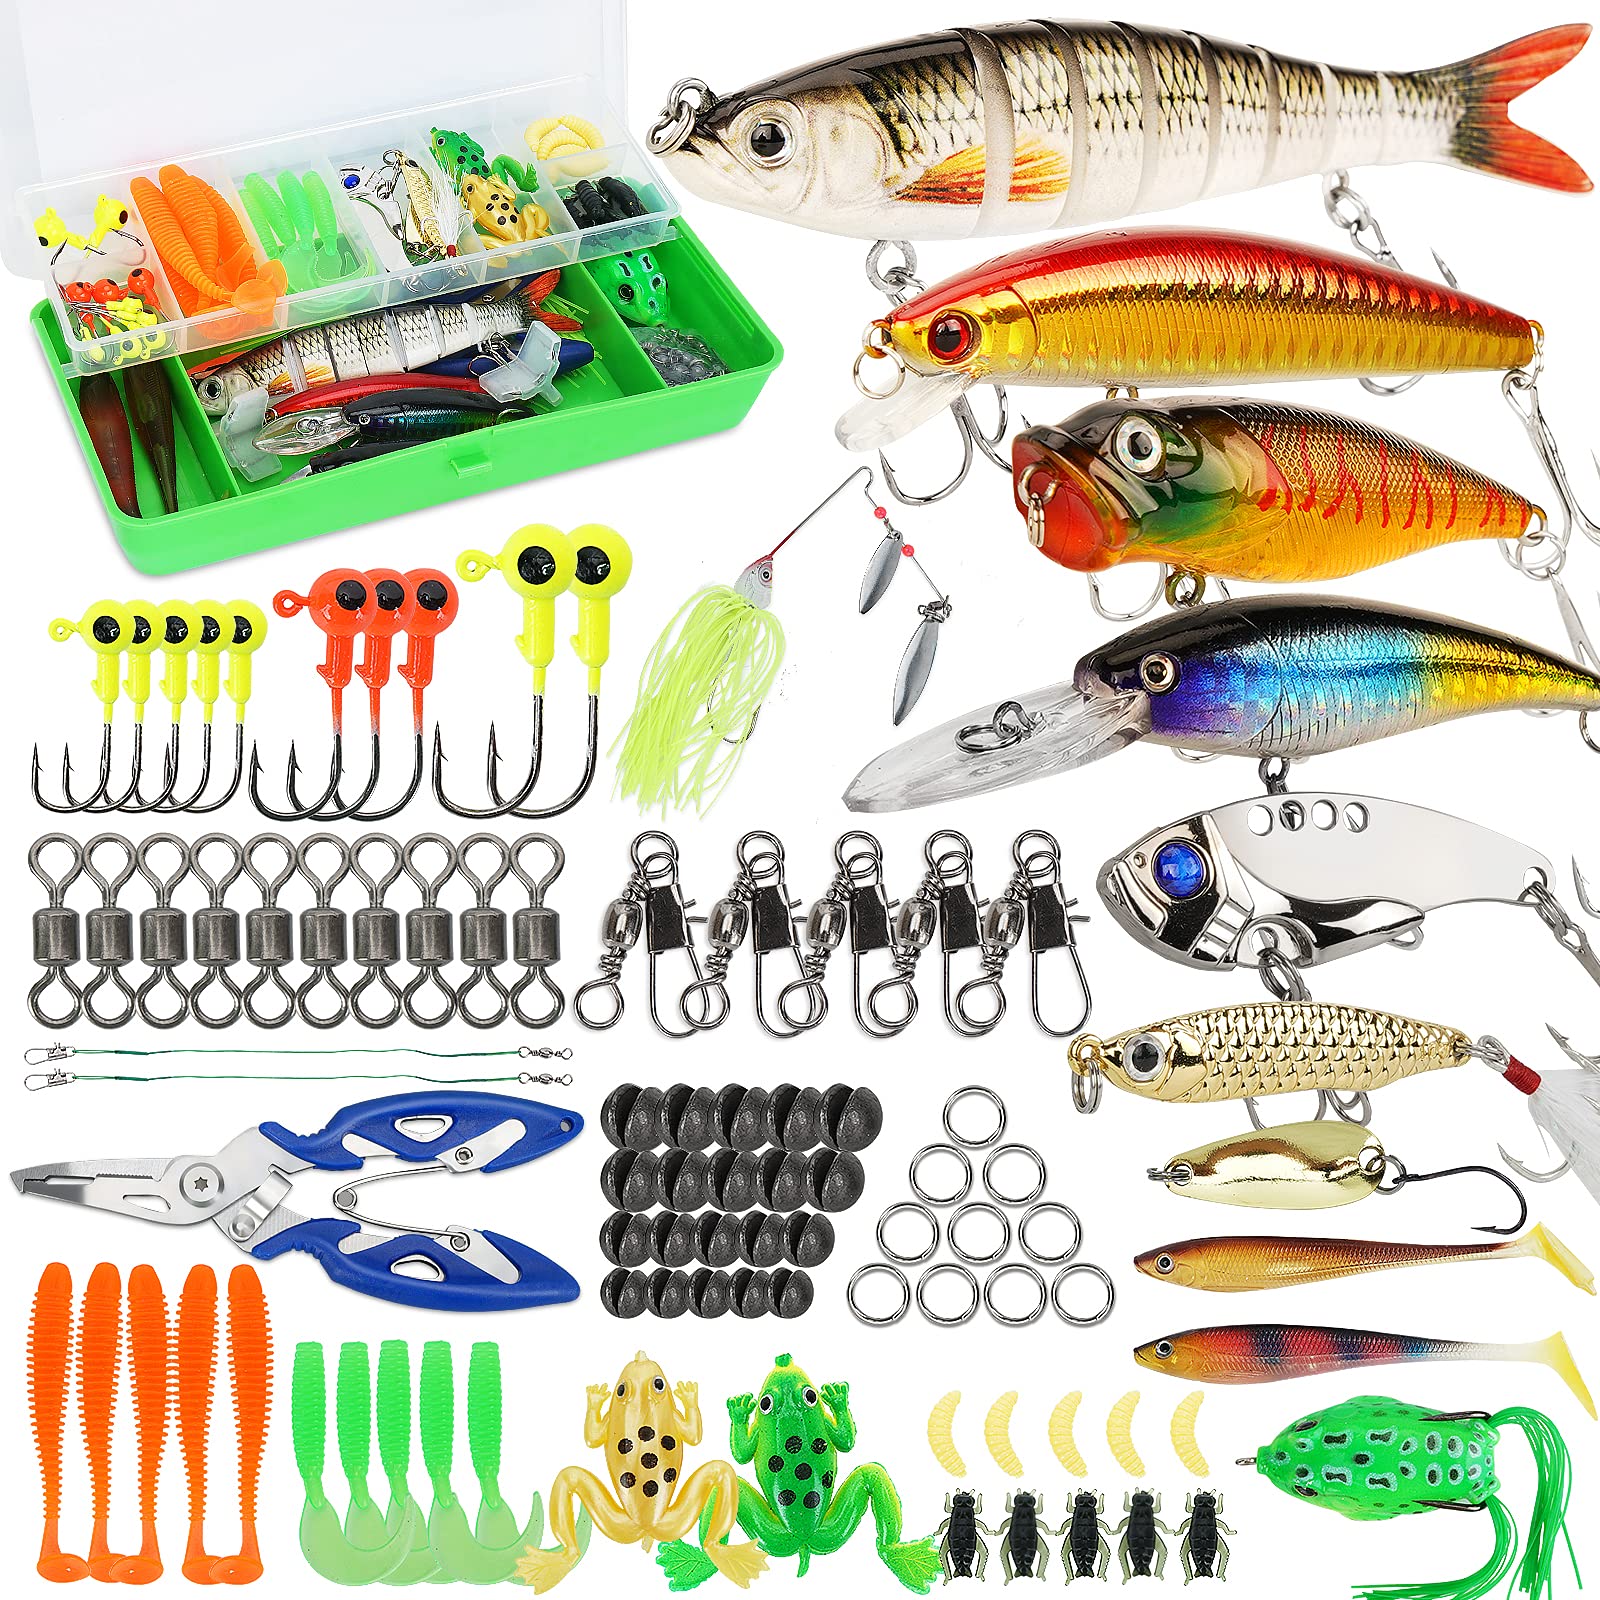 Fishing Lures Tackle Box Bass Fishing Kit,Saltwater and Freshwater Lures  Fishing Gear Including Fishing Accessories and Fishing Equipment for Bass, Trout, Salmon 92pcs Fishing Tackle Box